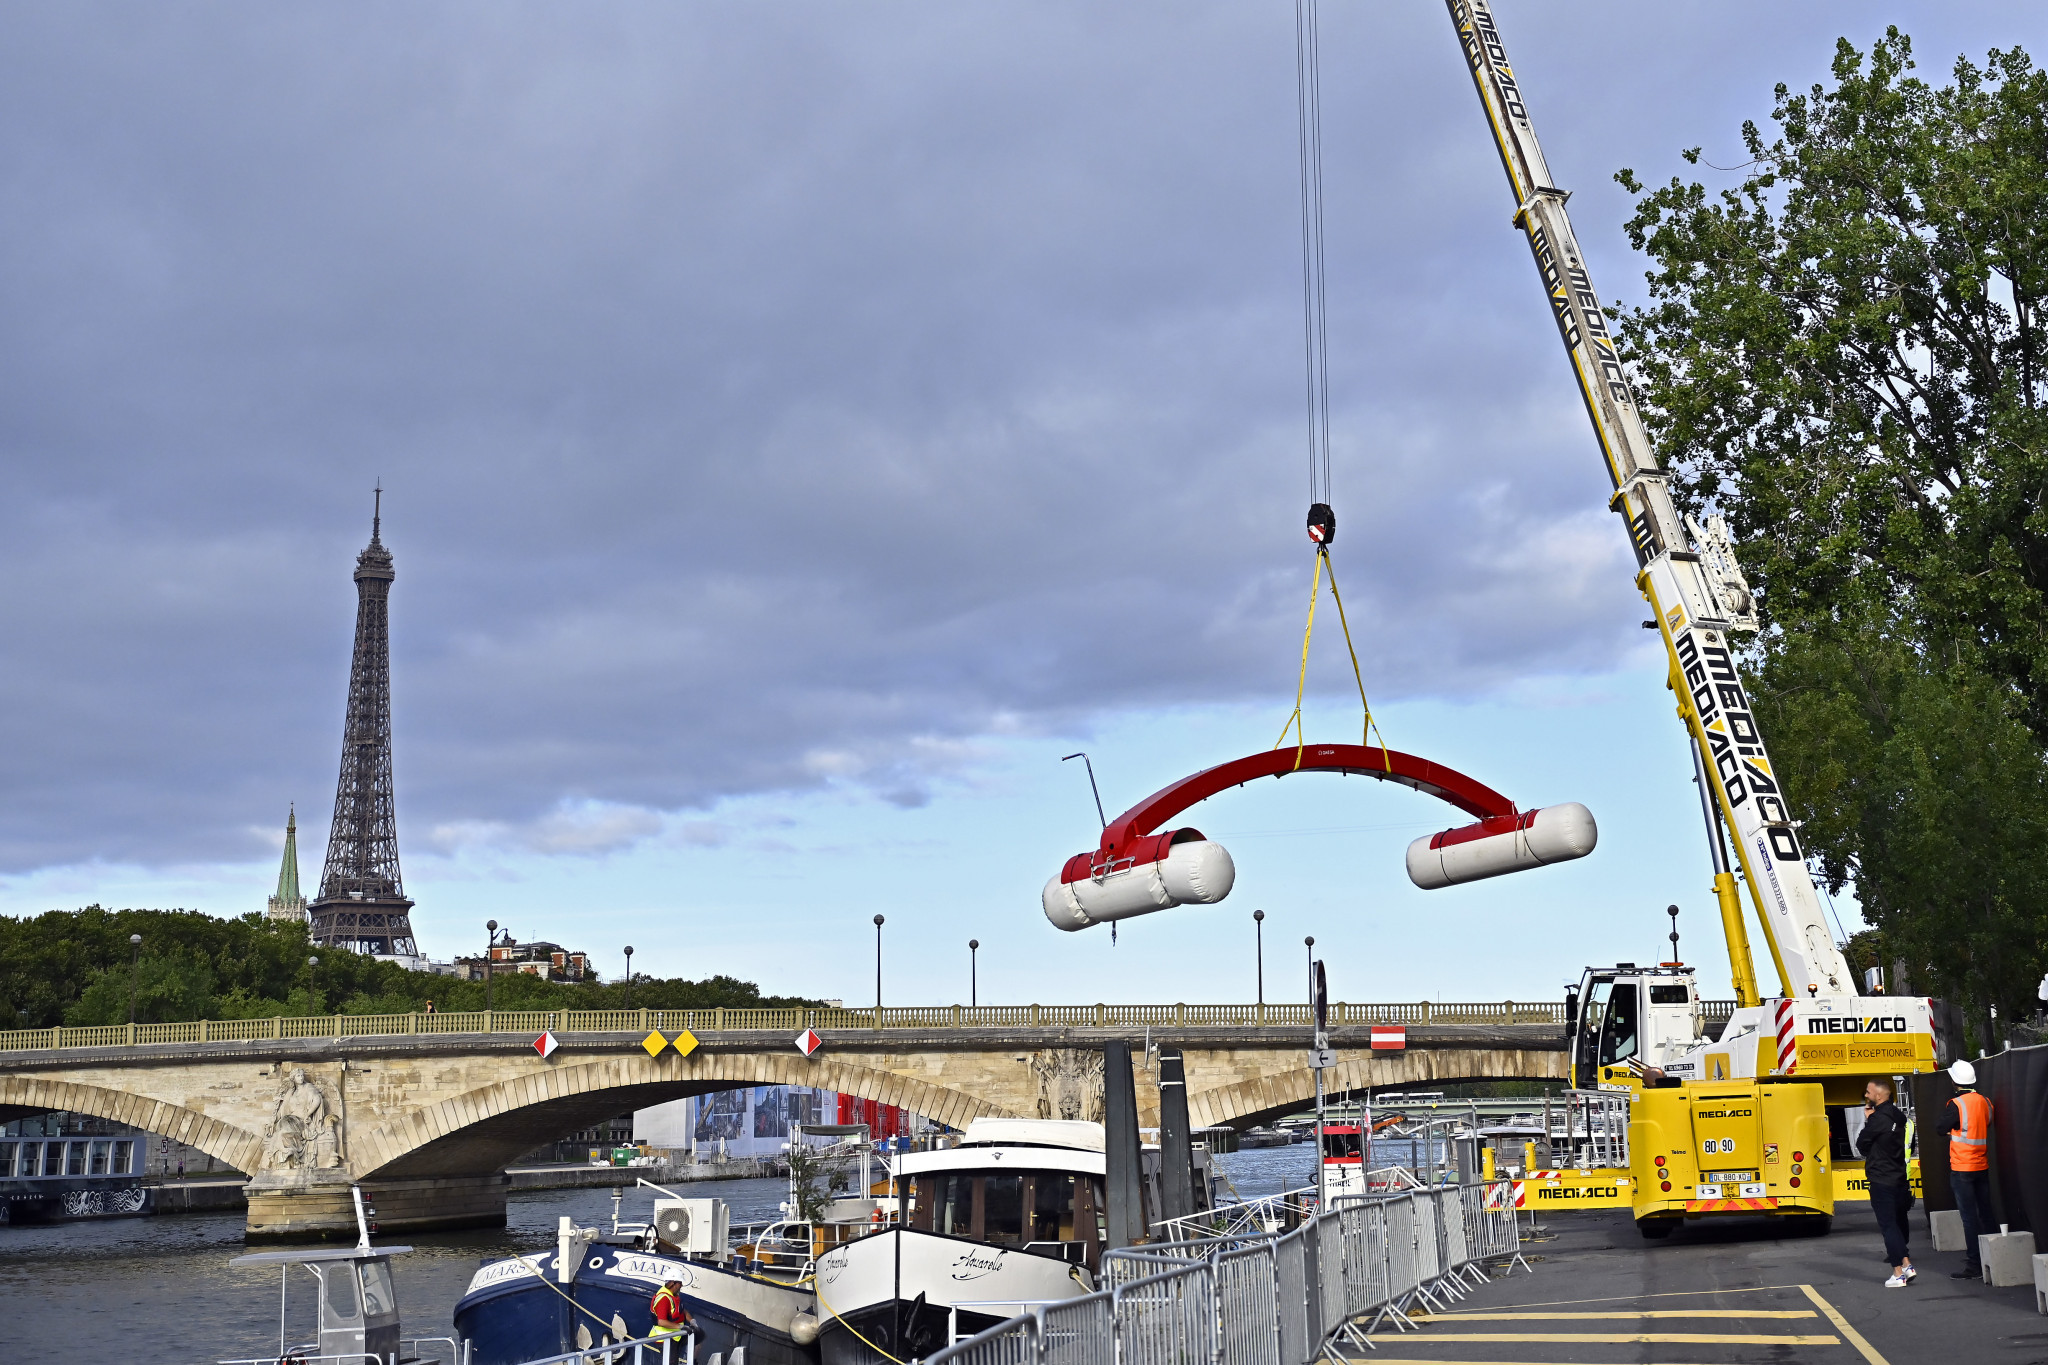 Buoys and rafts were removed from the Seine after the cancellation of the World Aquatics World Cup event because of adverse water quality readings ©Getty Images